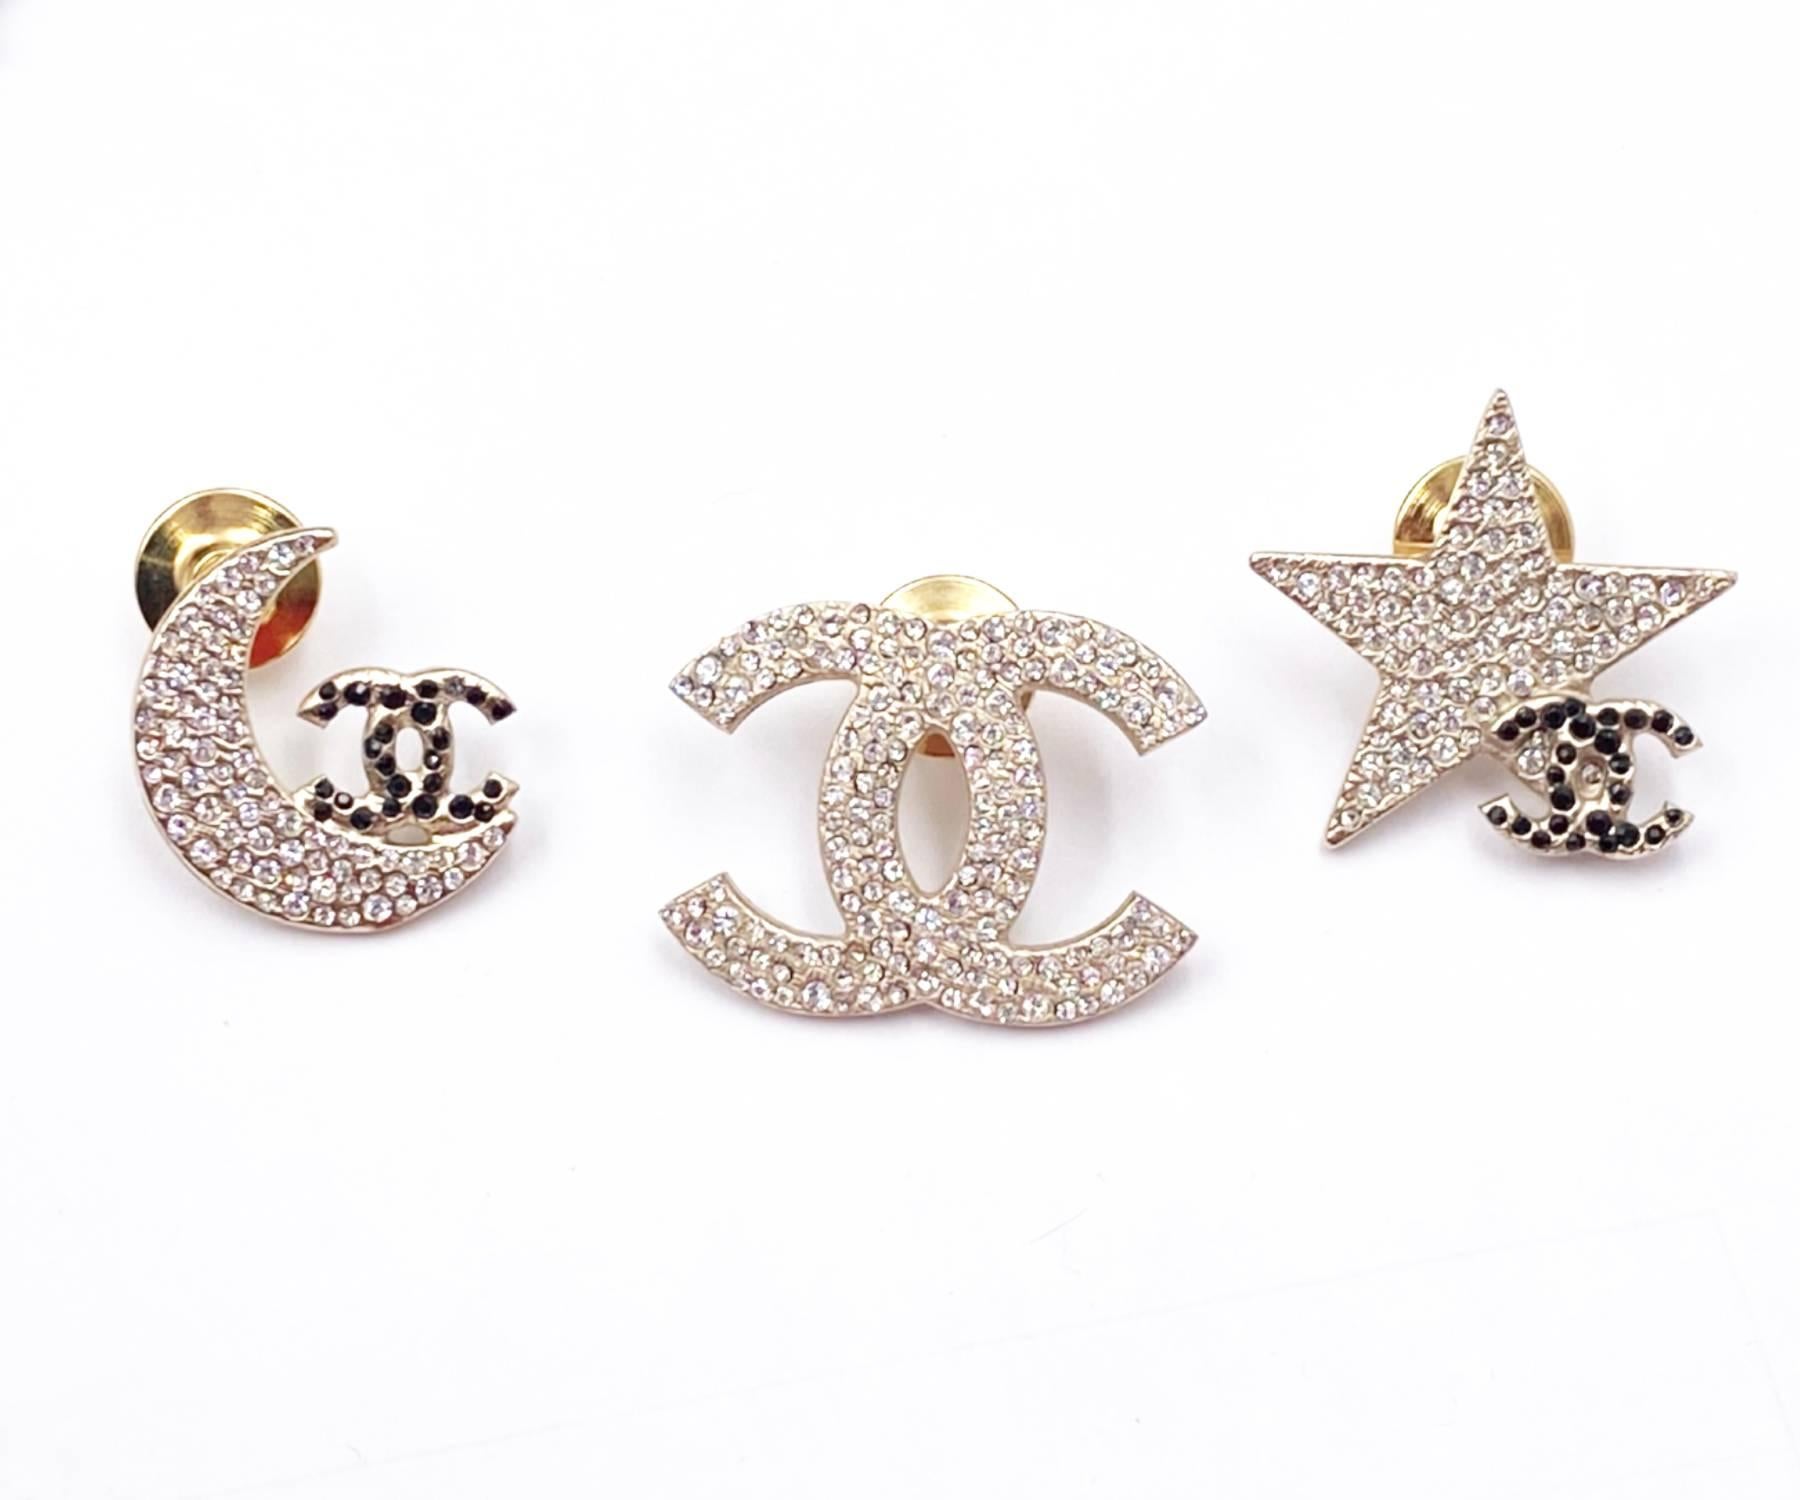 Chanel Rare Gold CC Moon Star Black Crystal 3 Pins In Excellent Condition For Sale In Pasadena, CA